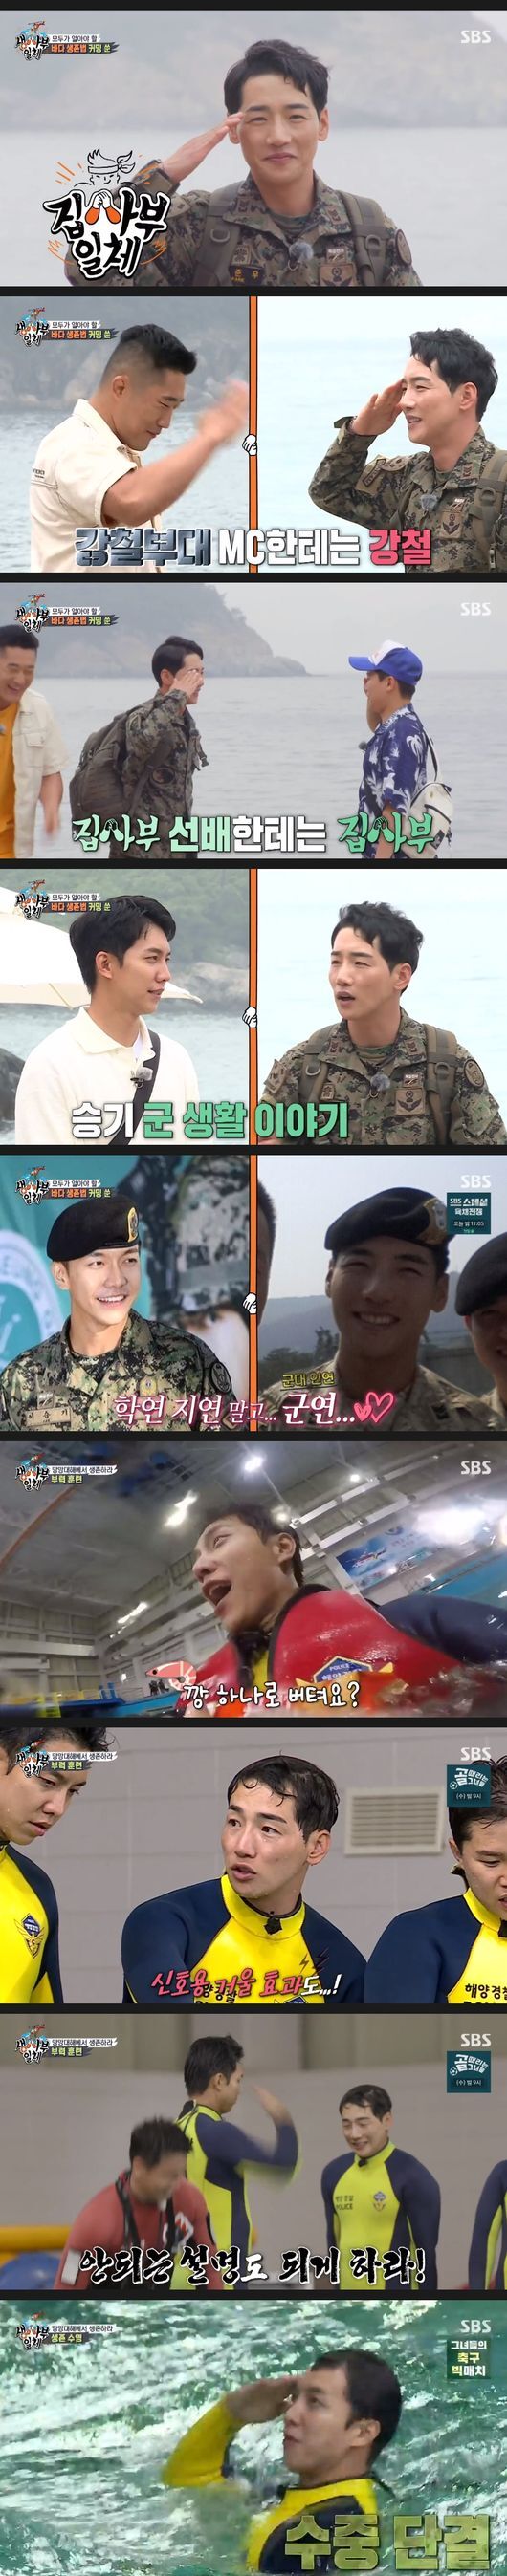 Lee Seung-gi and Park Guns Special Warrior Chemie burst properly in All The ButlersThe masters of the Korea Coast Guards were also admitted.A vacation special was drawn on SBS entertainment All The Butlers broadcast on the 27th, and Park Gun appeared.When Park Gun from Special Warrior appeared, Lee Seung-gi said, I should call him a officer.Lee Seung-gi was a soldier and a supervisor, he said politely to the army. Park Gun also introduced himself as Lee Seung-gi, a soldier in the military class, and Trot Special Warrior Park Gun, who worked with Lee Seung-gi and Special Warrior. Park Gun said, I am a lot younger in the entertainment industry, but I will call it Lee Seung-gi, who is 16 years old as I came to society. Lee Seung-gi said, Why do you wear a special Warrior suit when you come outside?Lee Seung-gi said, When I came out of TV, I was loved by the whole nation. I did not know my debut at that time. I met on the stage of the unit so much before my debut, I just said. The two saluted the slogan Consolidation saying Special Warrior is an eternal special warrior.Yang Se-hyeong and Kim Dong-Hyun asked, After the victory is over, I still have to drink about the army. Park Gun said, It was a good example, elite, full of physical strength and personality in the training camp.At the battle power contest, 1,000 people marathoned 10 times together, 90th out of 1,000 people, 90th out of 1,000 people, 100 friends, top 10 professionals among athletes, he said. It is the first time Lee Seung-gi has been trained as a warrior in the Special Warrior. Yang Se-hyeong is jealous and said, Lets edit this. I made it small.Then they all rode in the boat. The four people who fell off the boat. But when the crew didnt come to help, they were embarrassed.The moment Yang Se-hyeong urgently shouted Save me, the Korea Coast Guard came up for rescue.The members of the Korea Coast Guard, who rescued them, said, It is really cool, I have faith. Turns out that the Korea Coast Guard was the master.Marine police said, We will let you increase the Earth 2 rate from marine accidents, he said. We are the guardian of the sea, Poseidon.They will tell you how to cope with marine accidents in the summer, saying, I think it is a real situation to enter the passenger ship hull and I have to take Earth 2 until the end.He explained how to survive actual marine accidents.In a sinking ship, you should never wear a life jacket in a flooded situation, the Korean Coast Guard masters said. You have to move to the deck with a life jacket, and you have to start wearing a life jacket on the deck.The unreasonable movement depletes your physical strength, and stays with your body temperature as much as possible, he said, while he learned how to escape from the sinking ship by delivering the essential Earth 2 law.From Special Warrior, Lee Seung-gi, to Top Model, followed by Park Gun, showed a privileged clath. Next, he conducted buoyancy training.Park Gun gave Yang Se-hyeong a bottle of PET and showed consideration to choose the last mat.He then took care of the special warrior junior Lee Seung-gis dressing.At this point, the wild Waves that could actually happen were driven; with attention to whether they could secure buoyancy, they ended the buoyancy training, informing the rescue team of the derivation.Lee Seung-gi said, I am afraid that The Waves is hitting, Earth 2 training in The Waves, which was a big one for floats. I was really afraid that I could survive if I was actually devastated. Park Gun also said, The Waves hit me, so the water was not easy to get to my nose and mouth.Master of the Korea Coast Guard has announced the Earth 2 method from now on.First of all, about the mat, It is important to fold it wide and spread it wide, to keep breathing by lying down on the upper body only a part of the upper body. Park Gun said, It is a wide area and has a mirror effect for structural signals. Lee Seung-gi said, It is also a special warrior, unity!I laughed and saluted.The Korea Coast Guard also added that breathing is important, with The Waves backed up like Park Gun.In the meantime, when there is no float, Earth 2 swimming is needed and demonstration was shown.When The Waves hit, he stopped breathing and repeated his breathing by drinking Um The Waves when he went.First, he demonstrated his ladying up. It was important to reduce his physical strength as much as possible by taking his strength out of his body.Yang Se-hyeong followed, Lee Seung-gi shouted Top Model and Park Gun shouted Special Warrior Fighting.In the honor of Special Warrior, Lee Seung-gi praised his stable posture, saying Top Model, Korea Coast Guards are good.Even when you did the best, Park Gun laughed, shouting Unity! at Lee Seung-gi, as the Special Warrior deputy exploded.Next, we conducted group training with the strategy of living together, scattering and dying. It was important not to let go of each others hands even in the rough The Waves.The sonar breathing learned earlier did not let go of each others hands, could be rescued by enduring The Waves without one fall, and succeeded in all Earth 2.It was a meaningful training enough just to be on Earth 2 together.The following is a training exercise to save others. I learned how to use lifeguards to rescue the drowned.It was important to throw a life ring to the back, so that the master did not fit.Although it is a training, I trained as strict as saving life.In particular, Kim Dong-Hyun, who wrapped the line, said, Complete dangerous behavior, even the rescuer can be in danger. In fact, carelessness can lead to a bigger accident.The next week, he announced his escape from the ship and announced his last Earth 2 training to overcome his limitations.It was noticed that the members could complete the training safely in the stronger Earth 2 training.All The Butlers broadcast screen capture